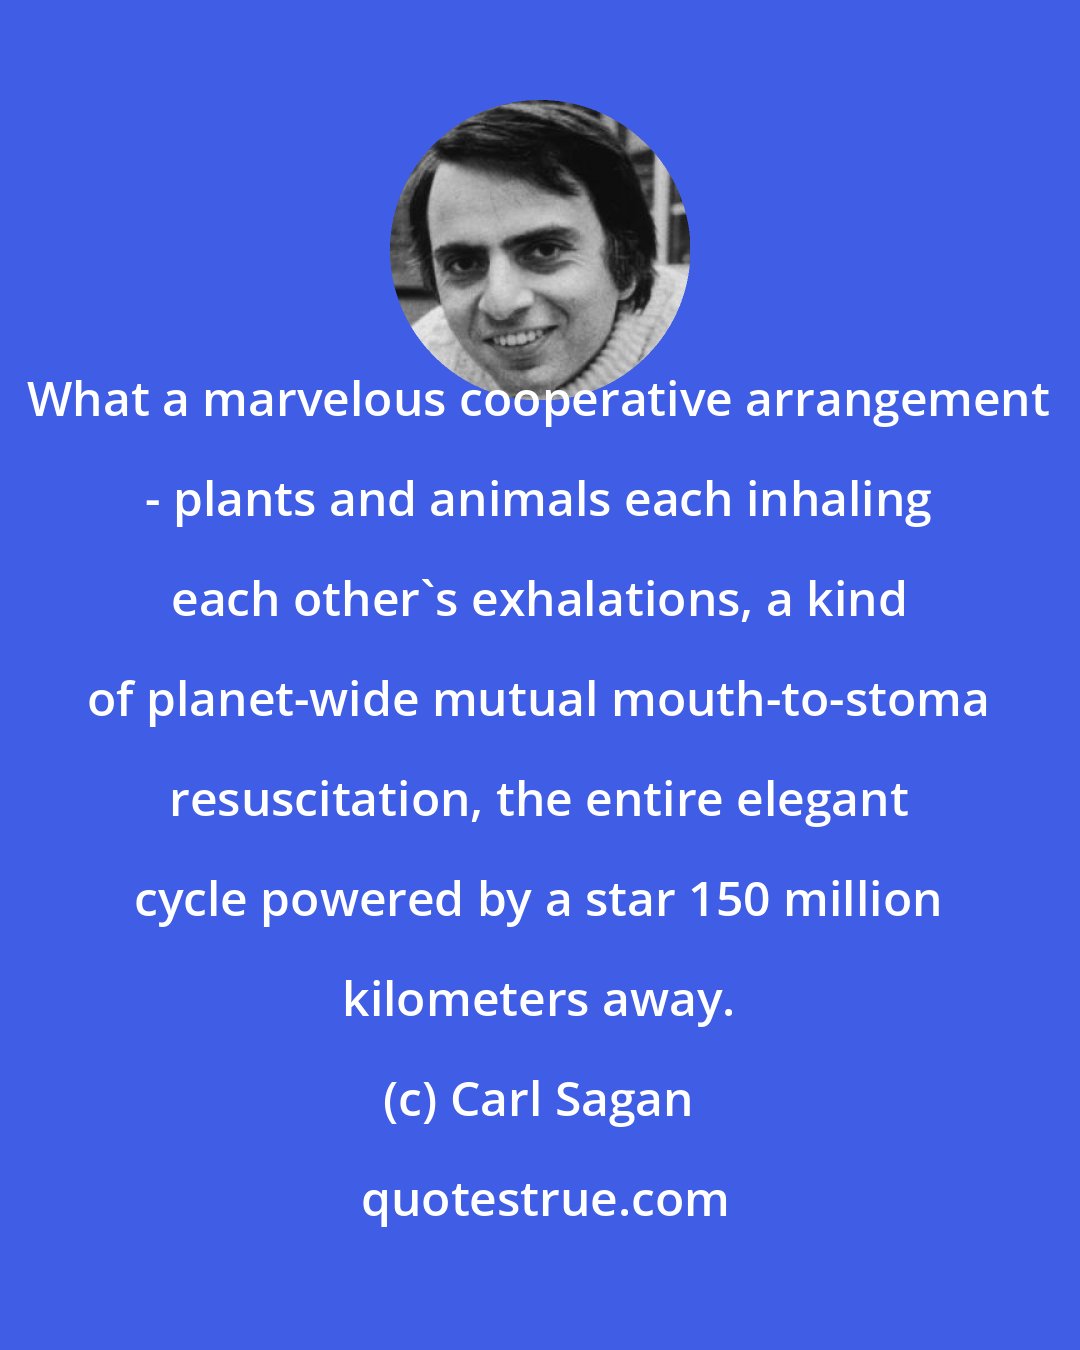 Carl Sagan: What a marvelous cooperative arrangement - plants and animals each inhaling each other's exhalations, a kind of planet-wide mutual mouth-to-stoma resuscitation, the entire elegant cycle powered by a star 150 million kilometers away.